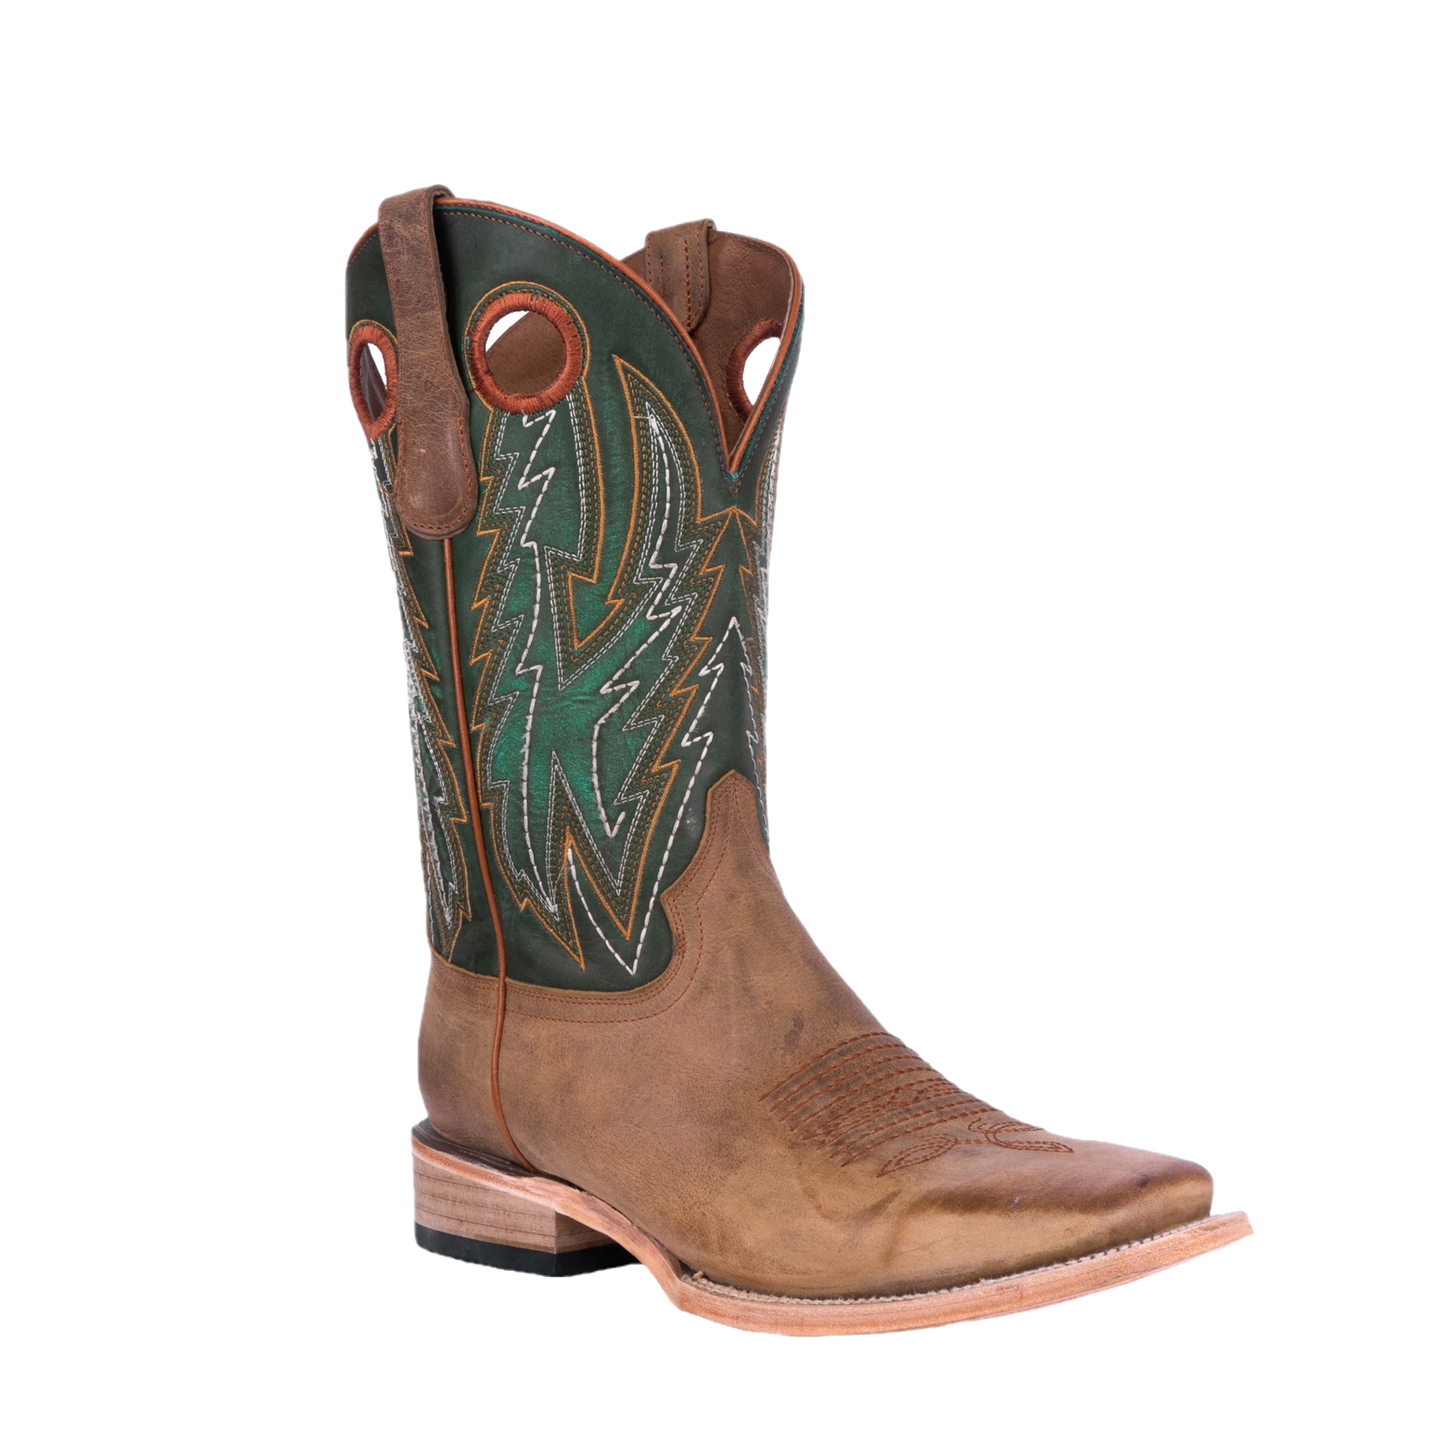 Corral Men's Embroidered Tan & Green Western Boots L6080